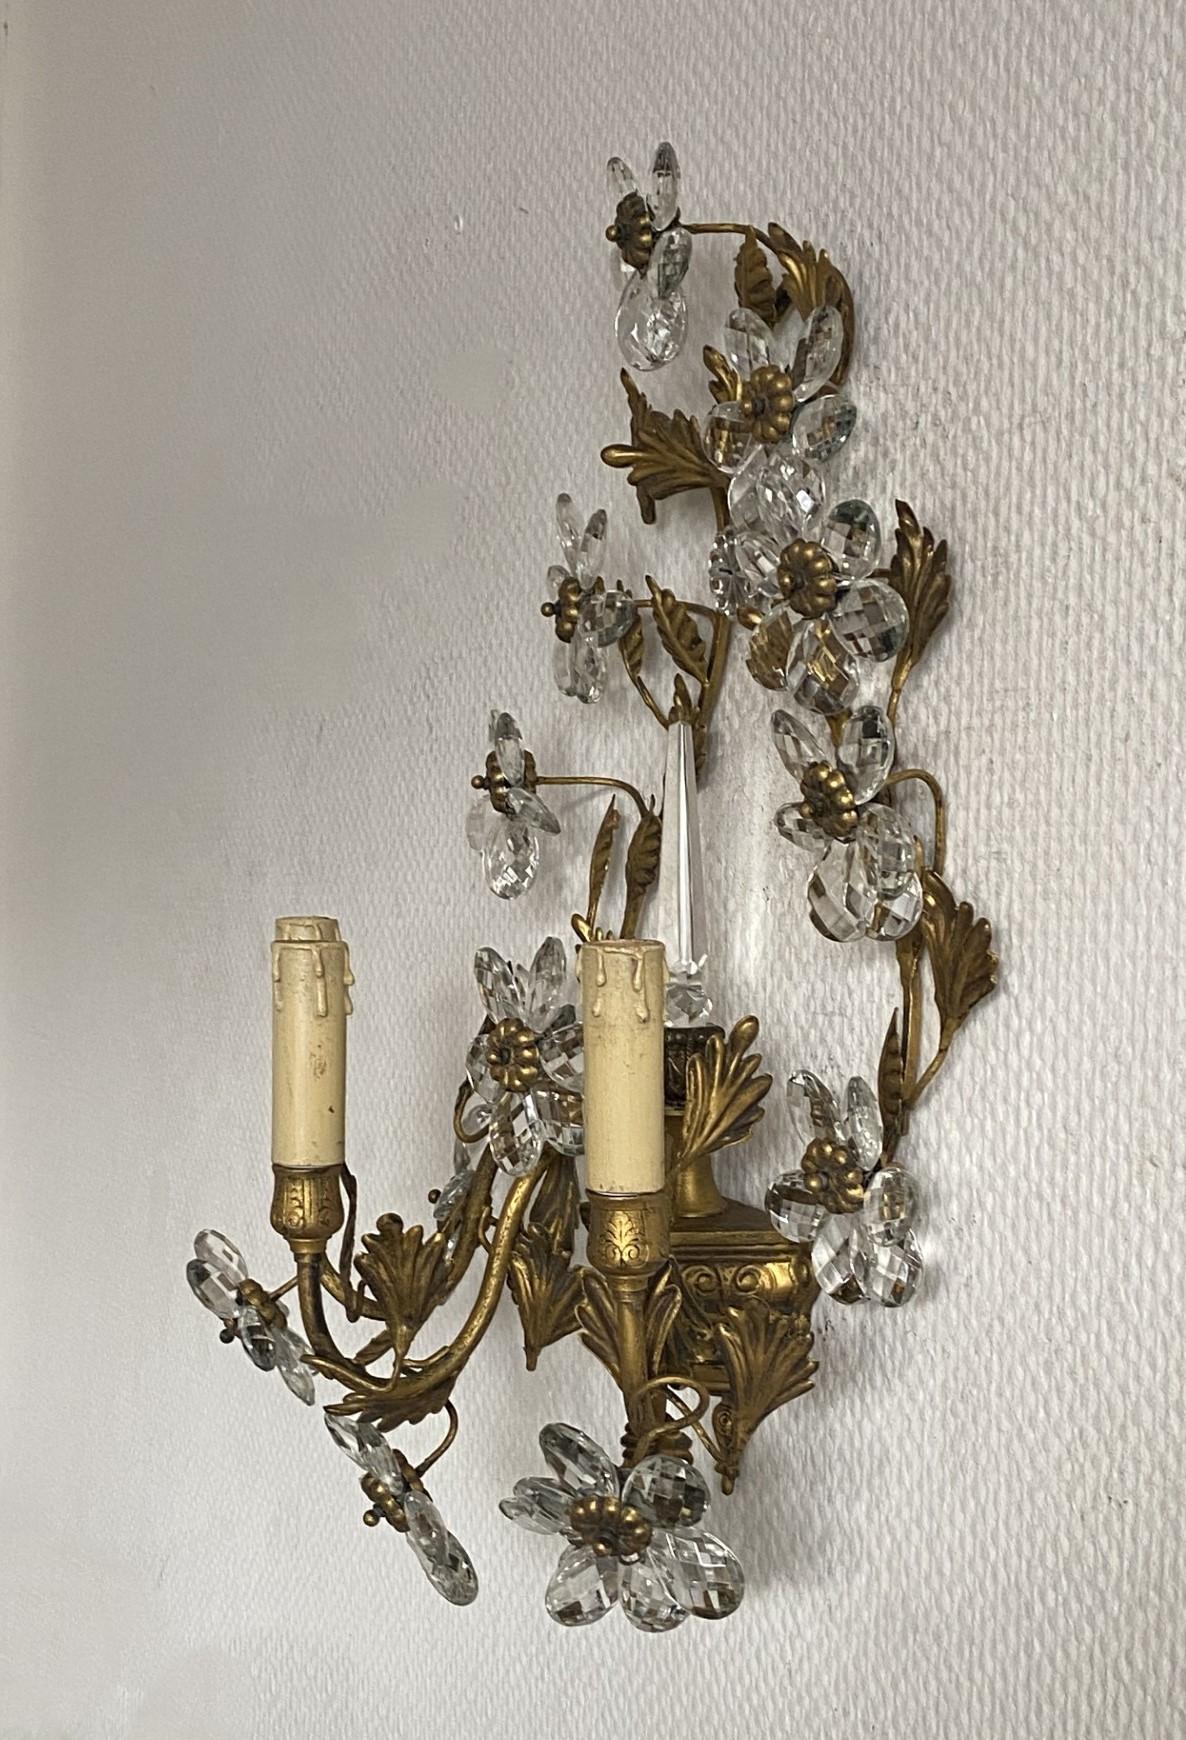 Faceted Pair of Large Maison Baguès Wrought Iron Crystal Flower Wall Sconces, 1930s For Sale